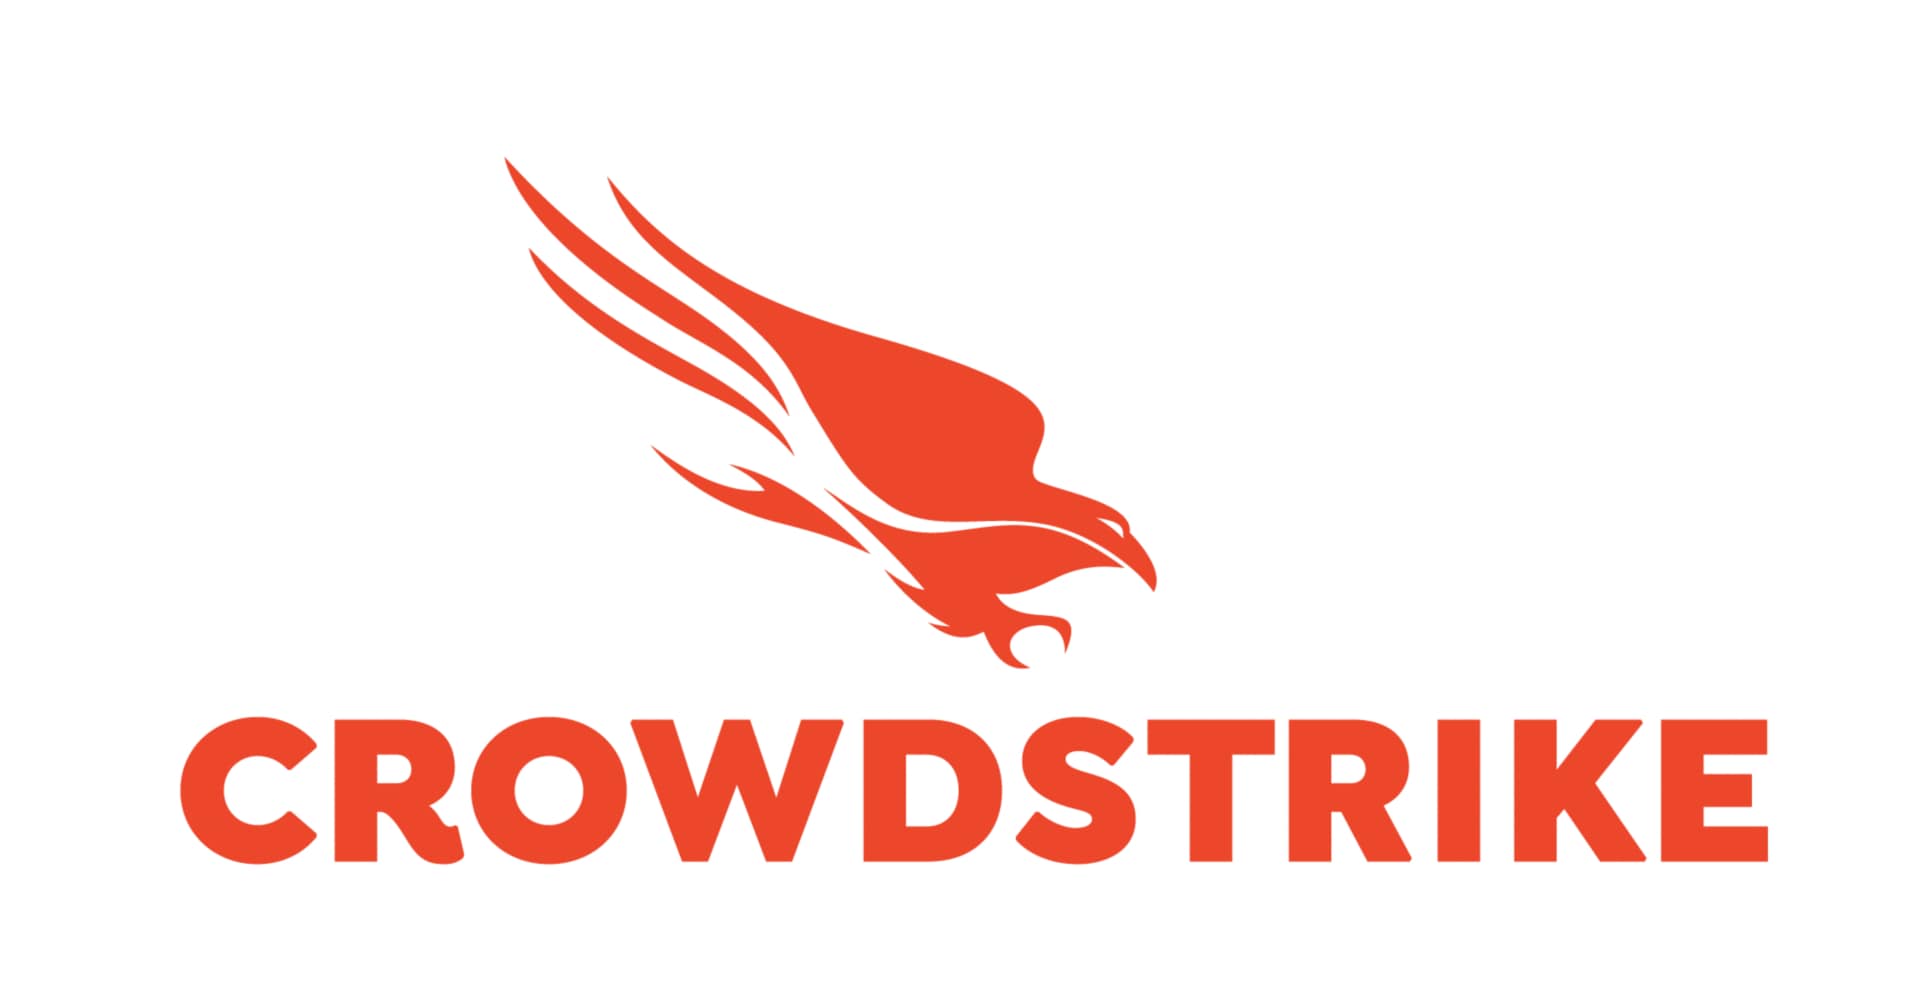 CrowdStrike 2-Month Falcon Insight (EDR) Application Software